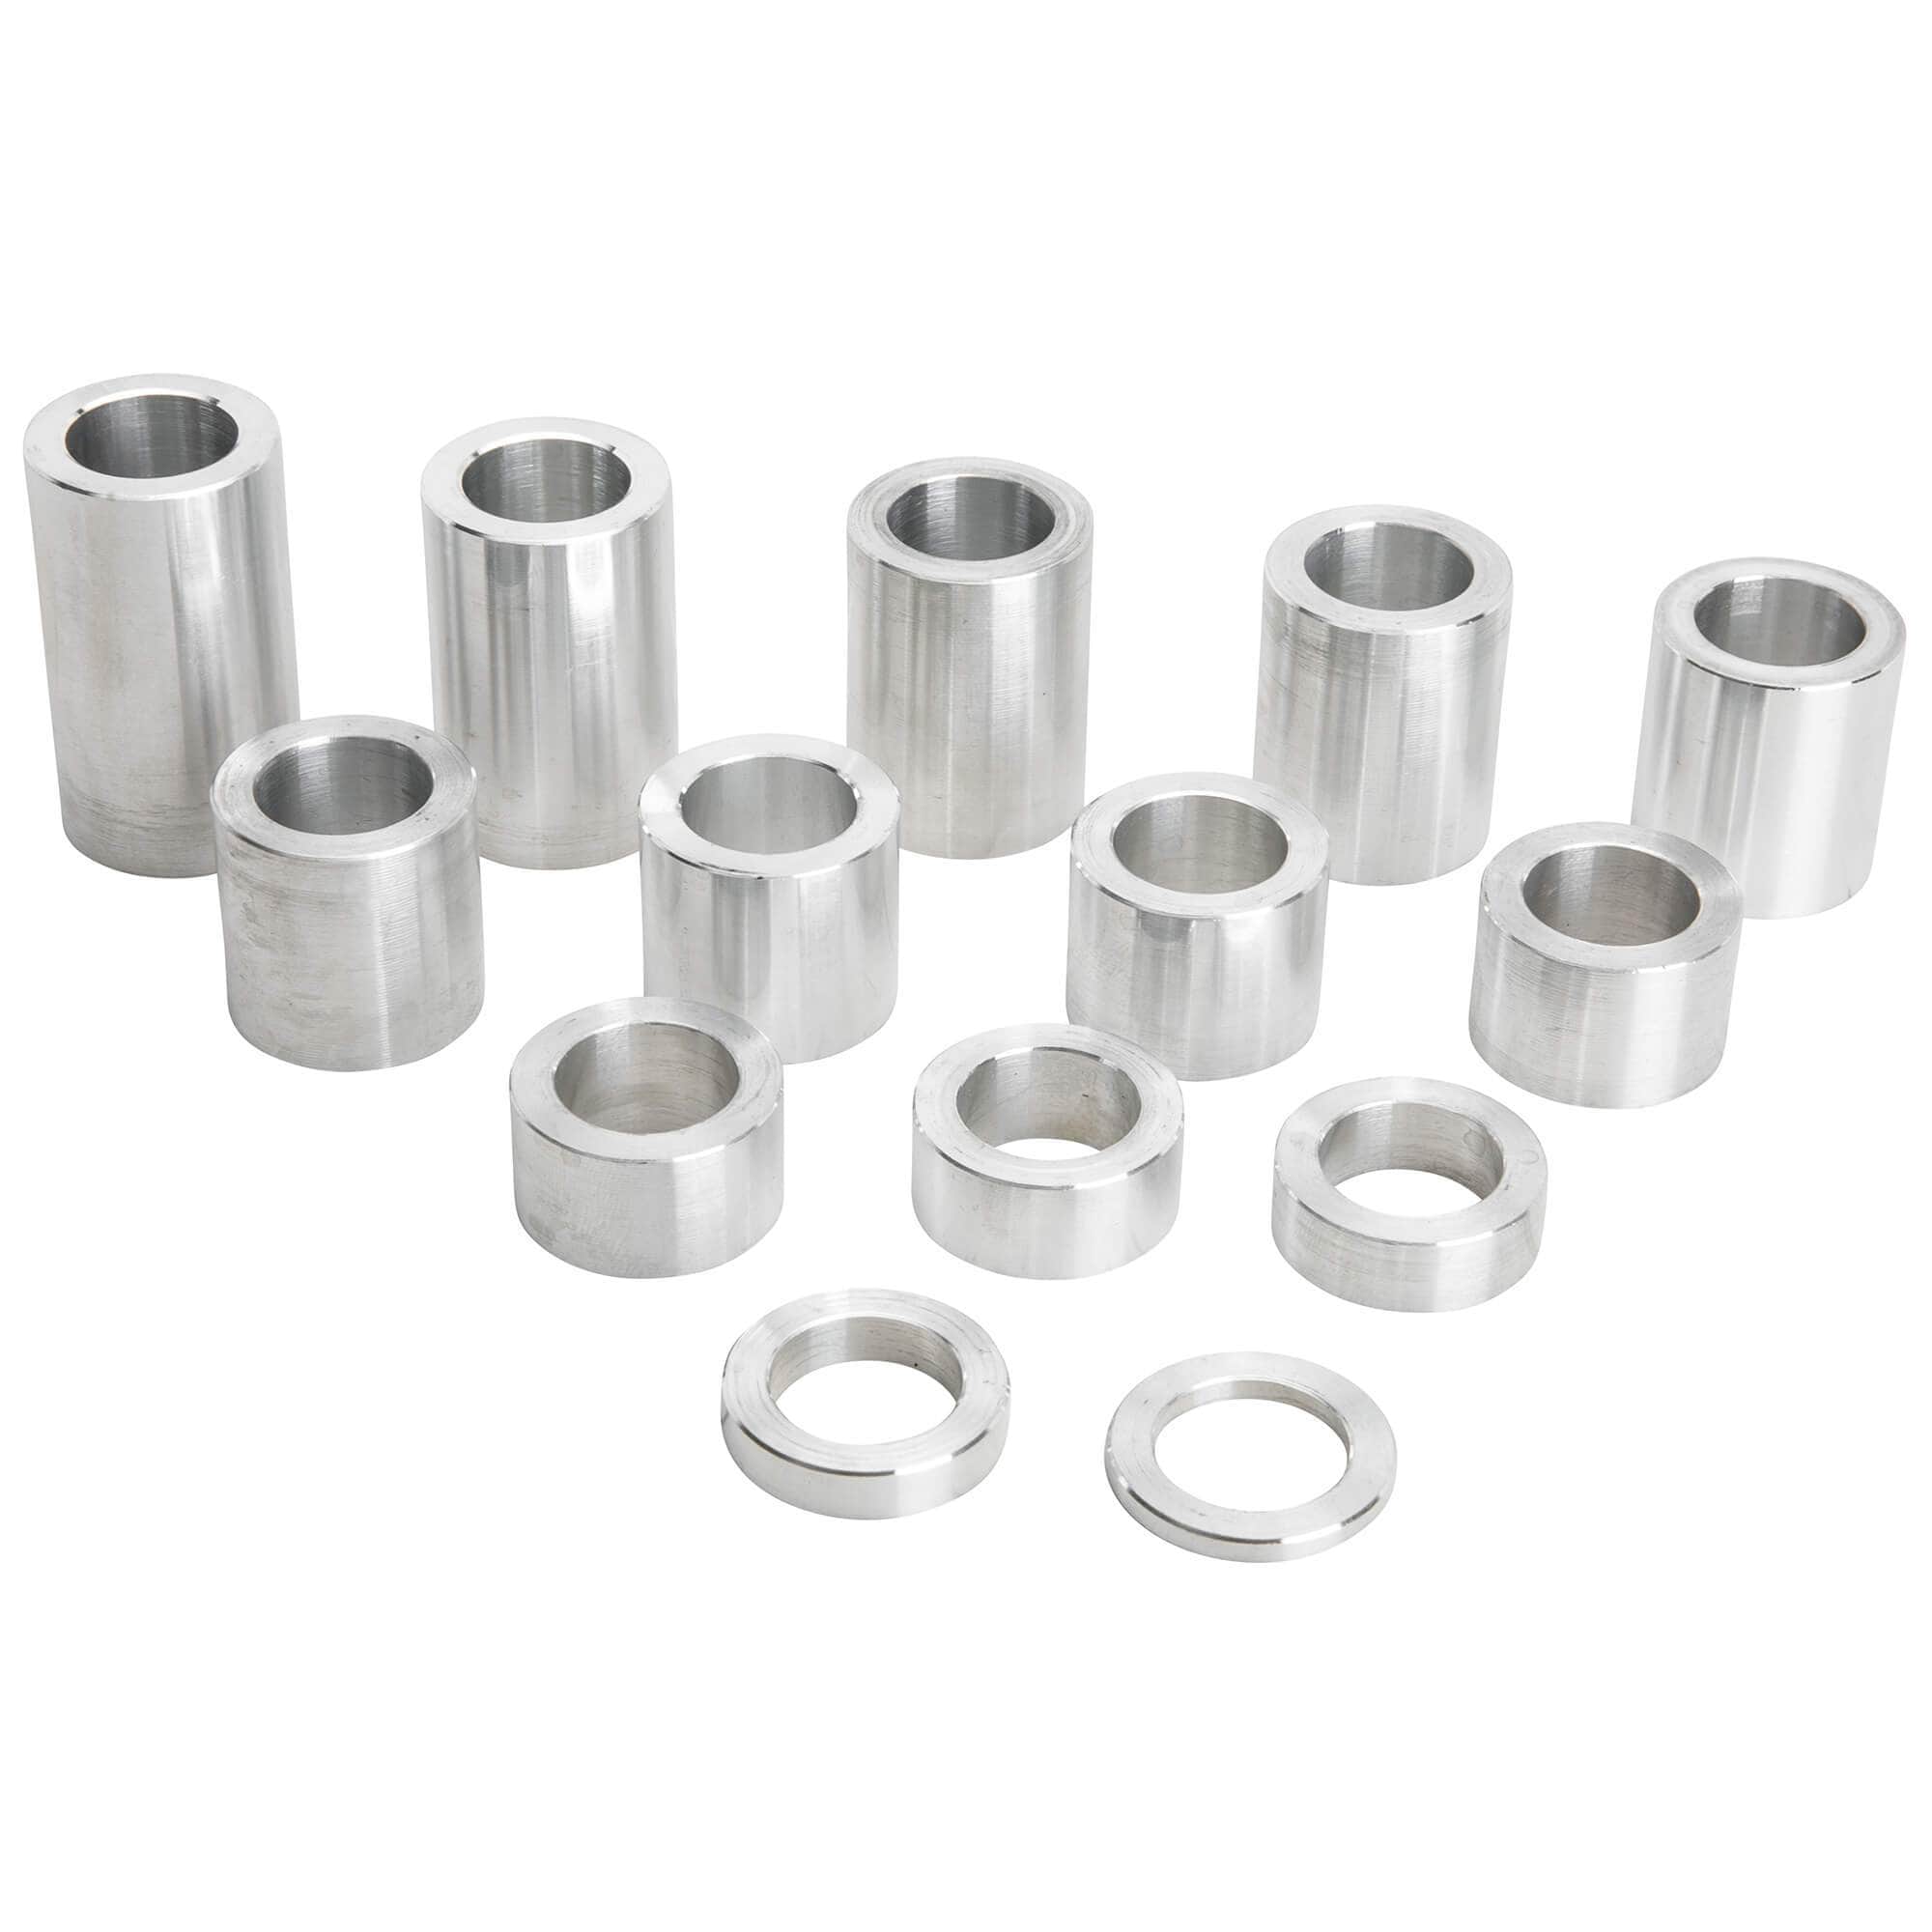 Cycle Standard 14 Piece Aluminum Wheel Axle Spacer Kit - 1.125 inch O.D. x  3/4 inch I.D. – Lowbrow Customs